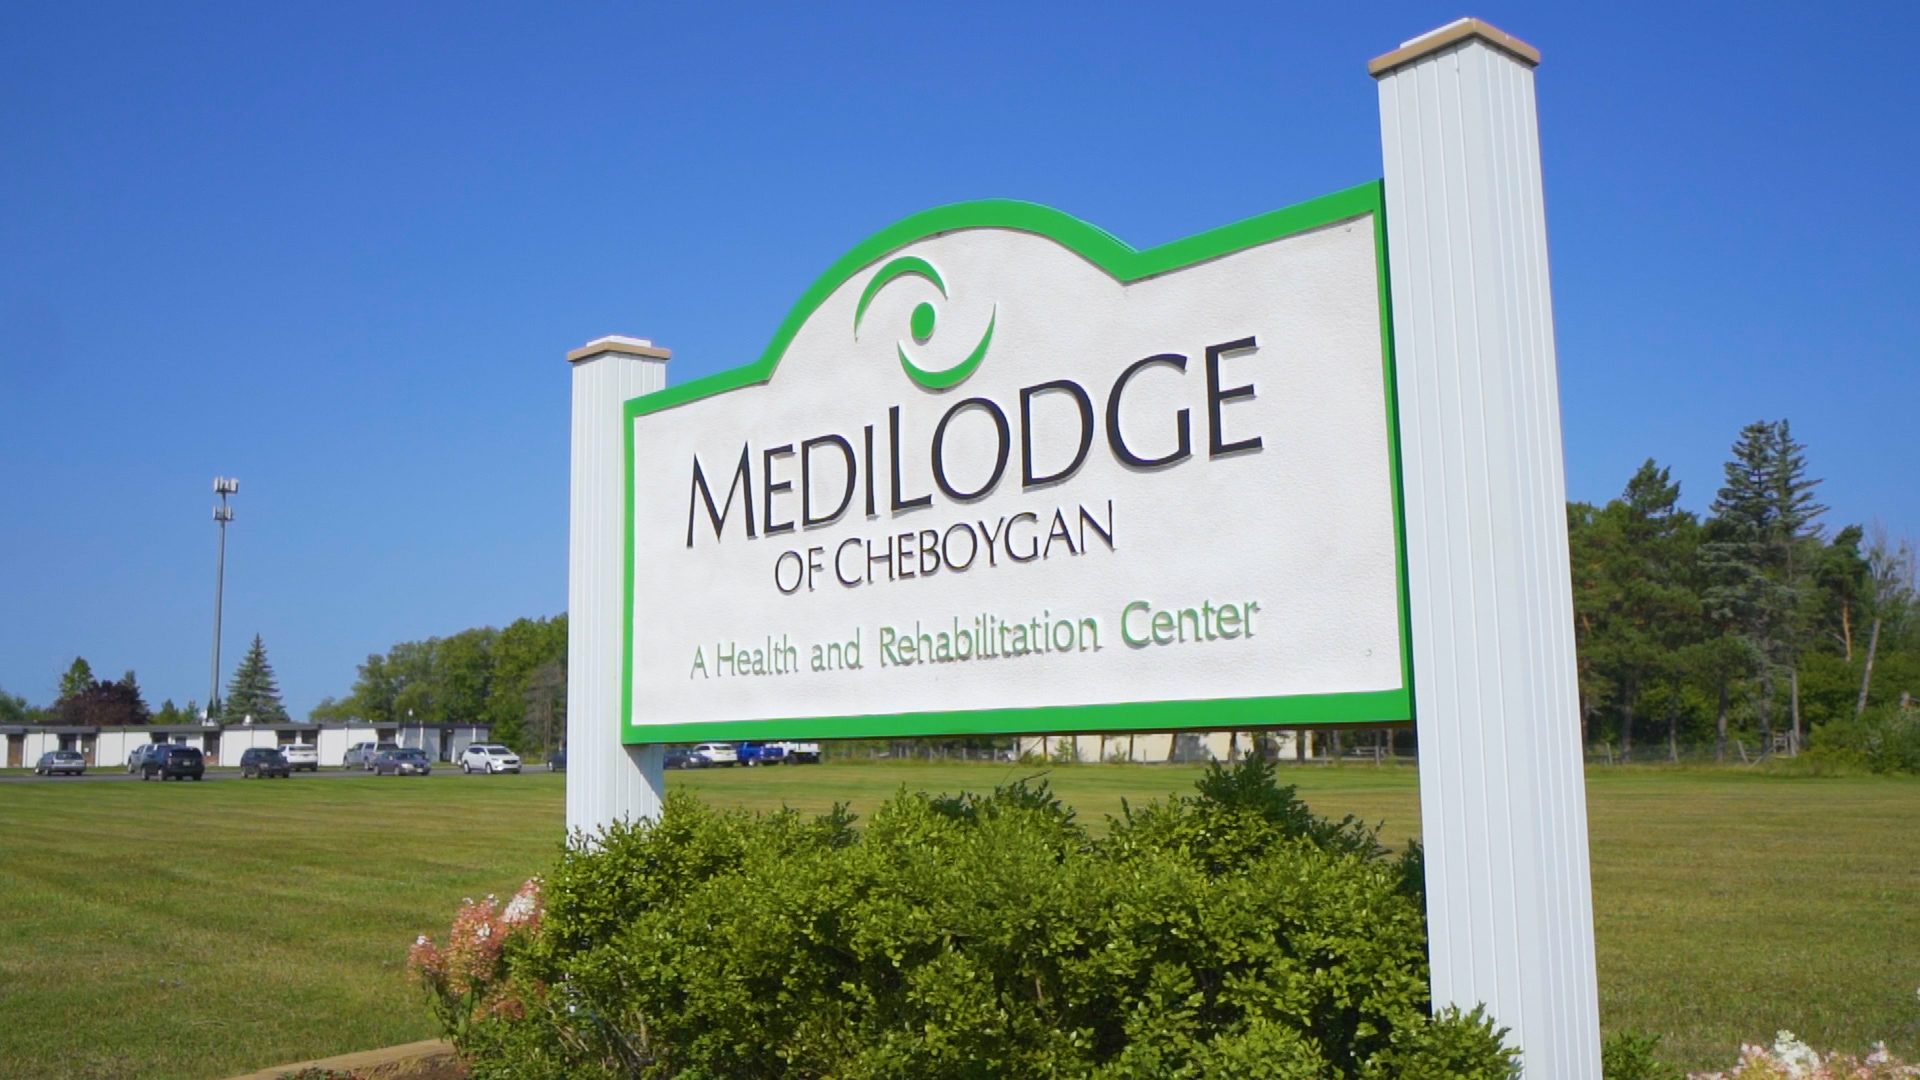 Medilodge of Cheboygan Sign outside the building.